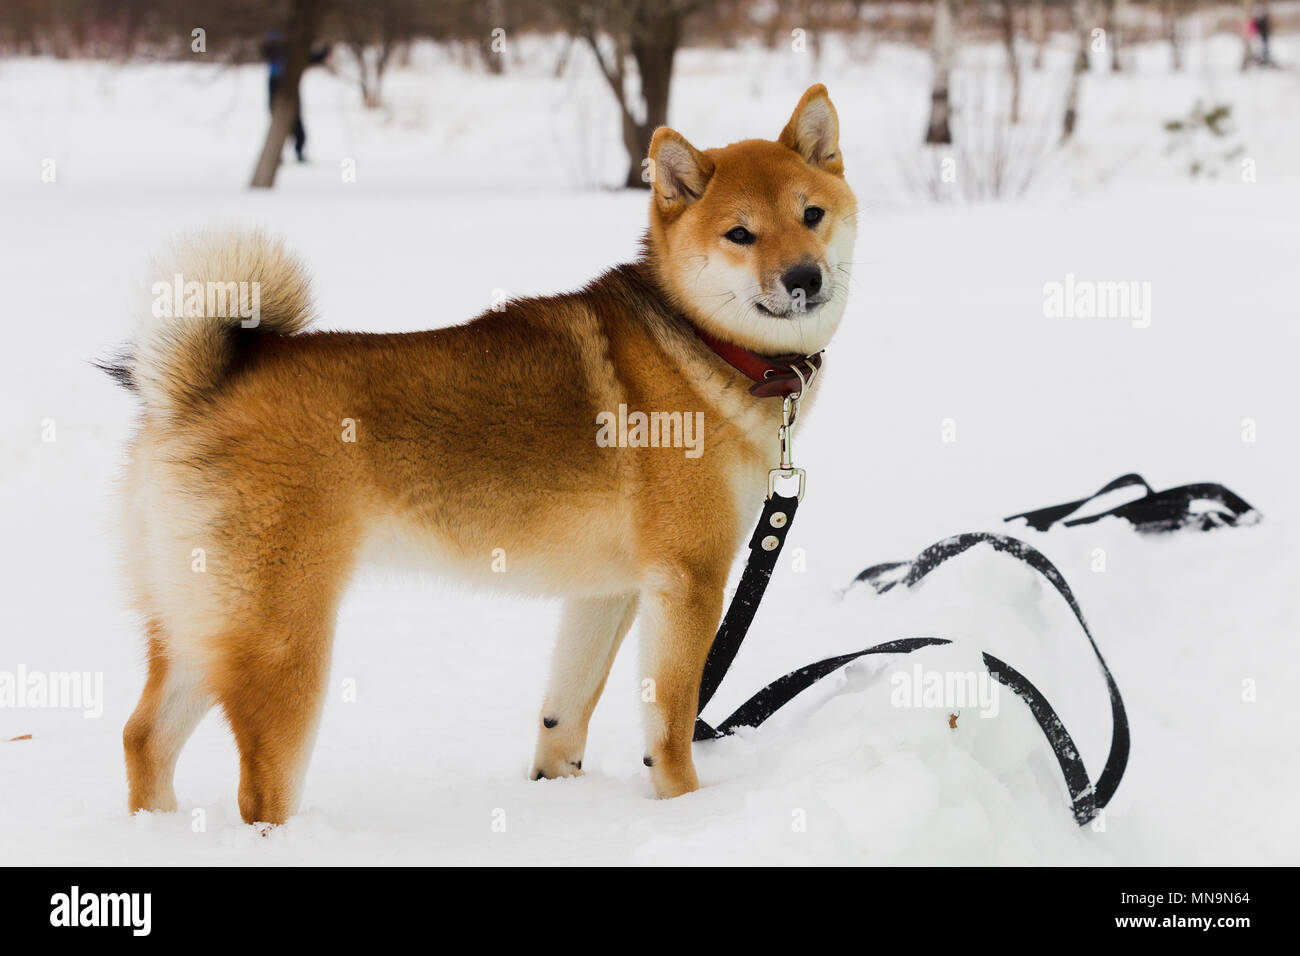 Japanese Dog Breed Shiba Inu on snow background winter cloudy day, natural light Stock Photo